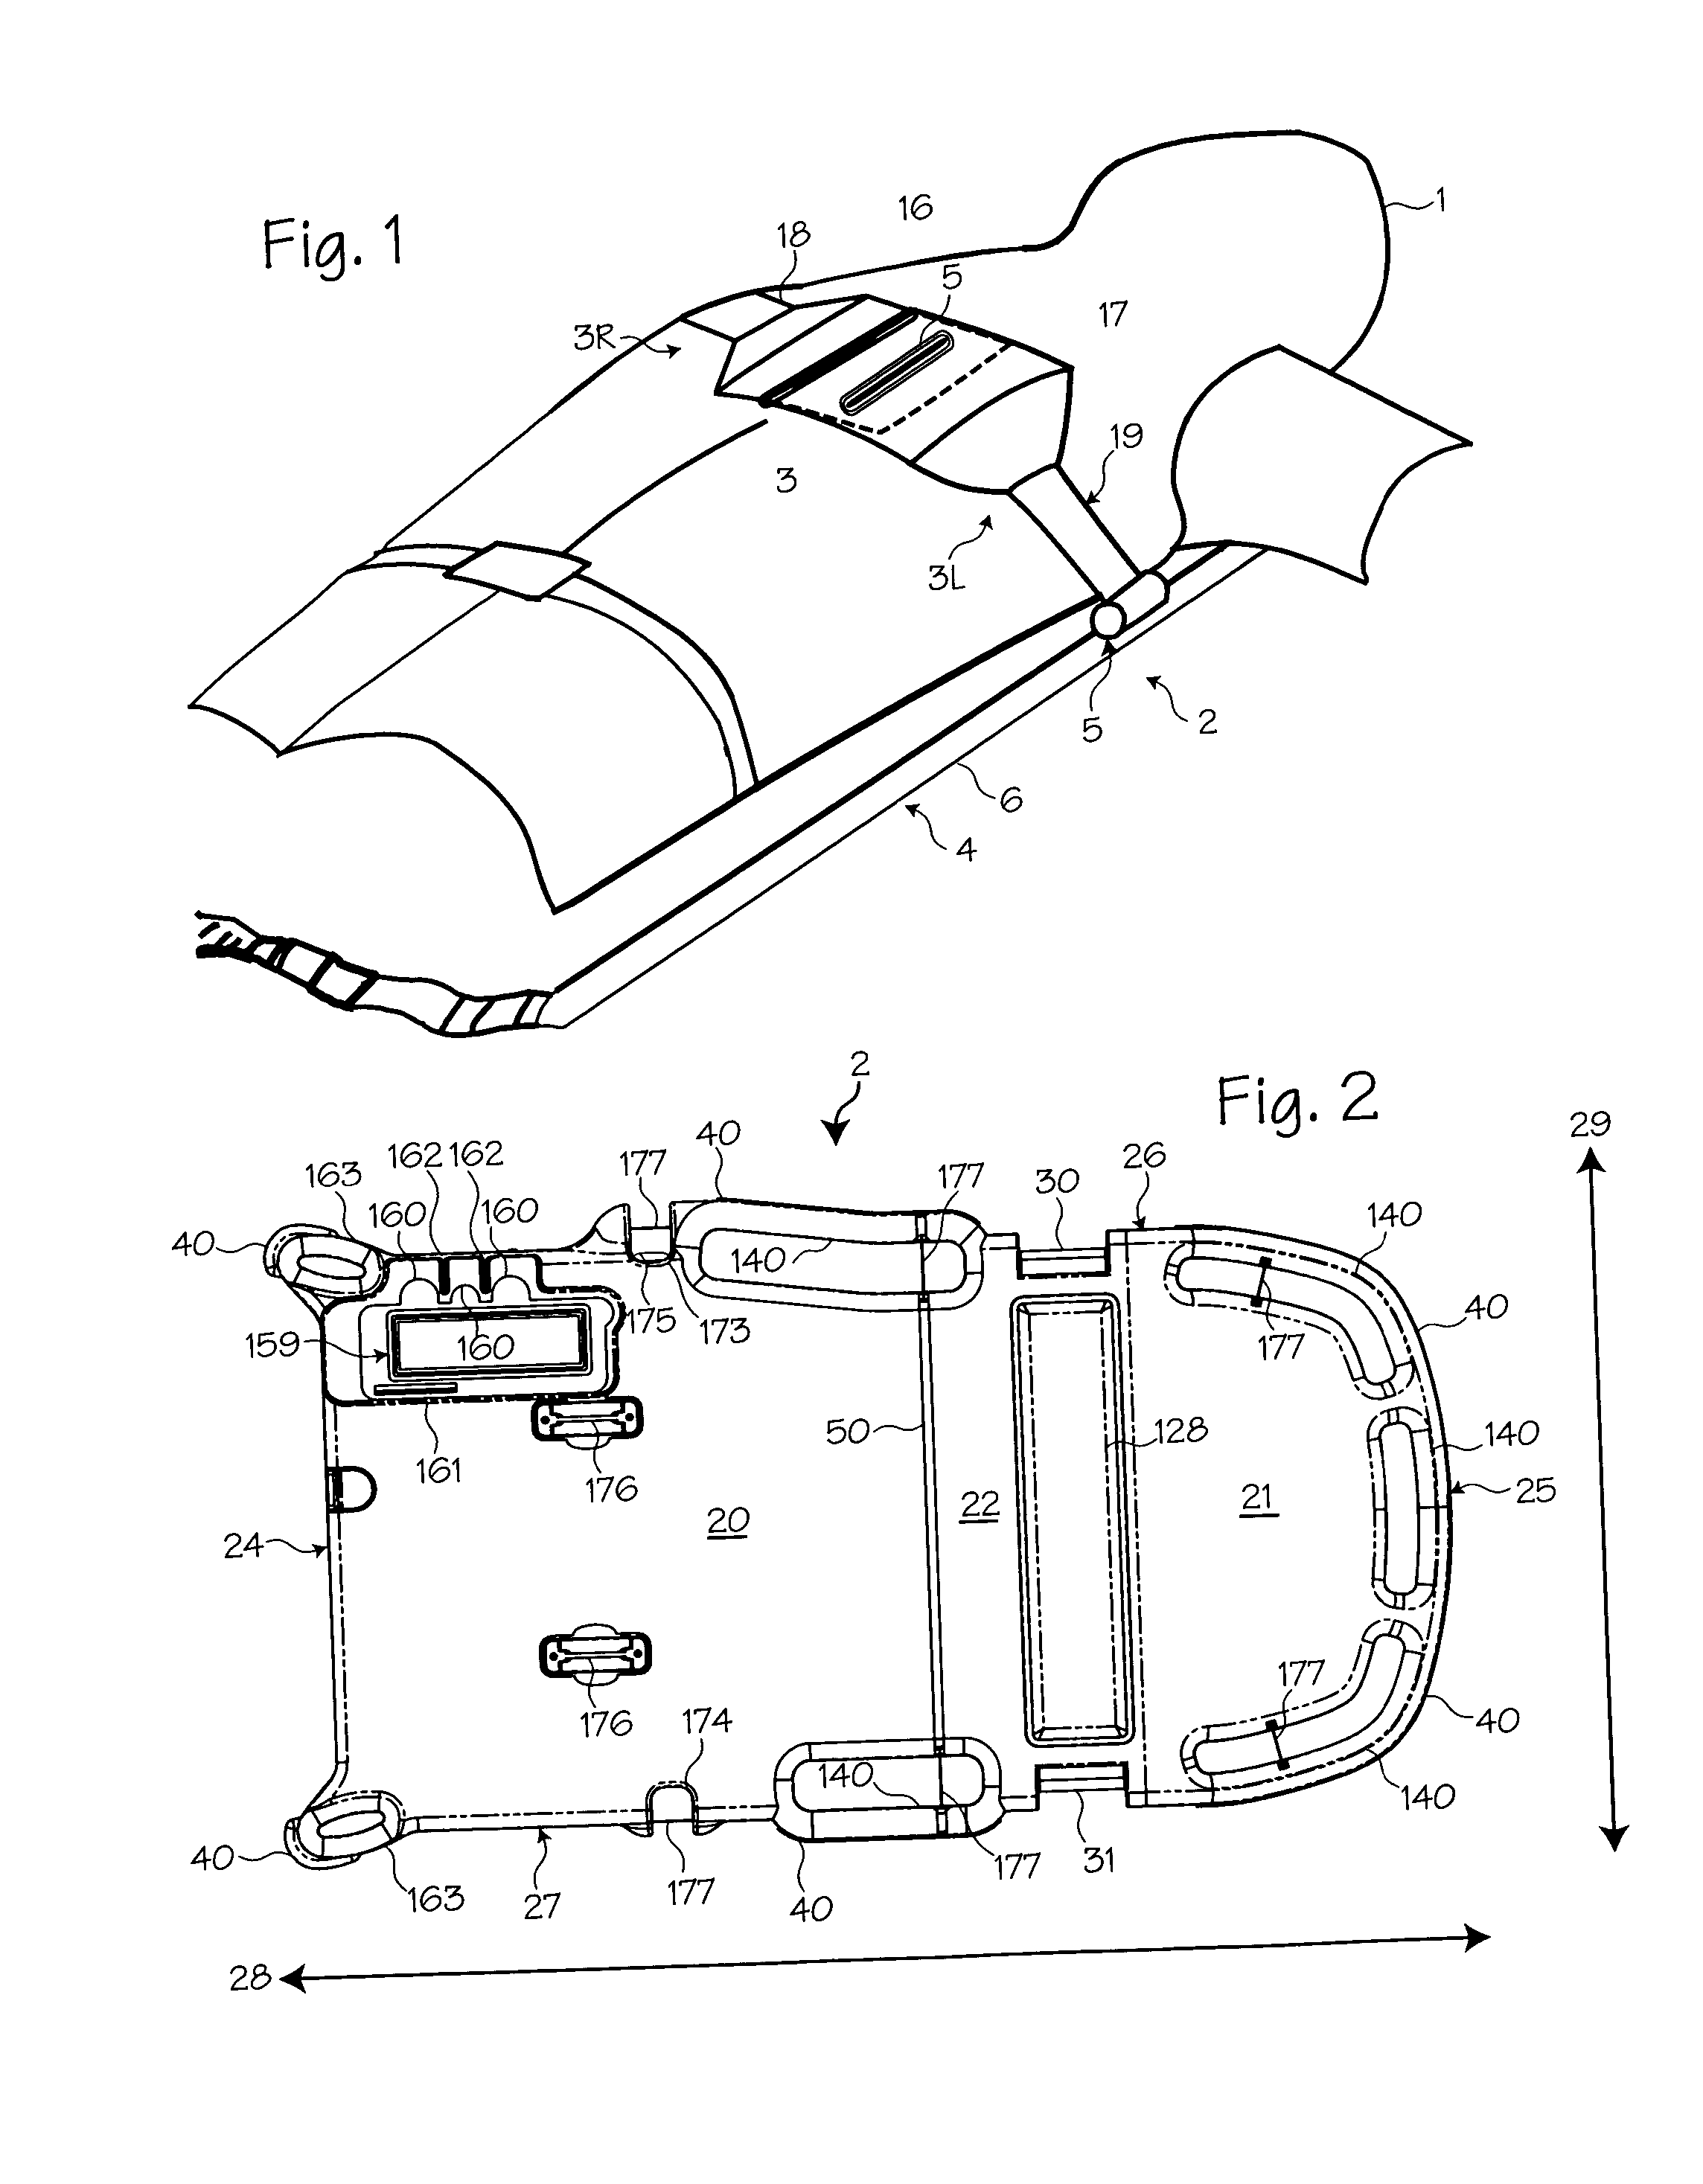 Lightweight electro-mechanical chest compression device